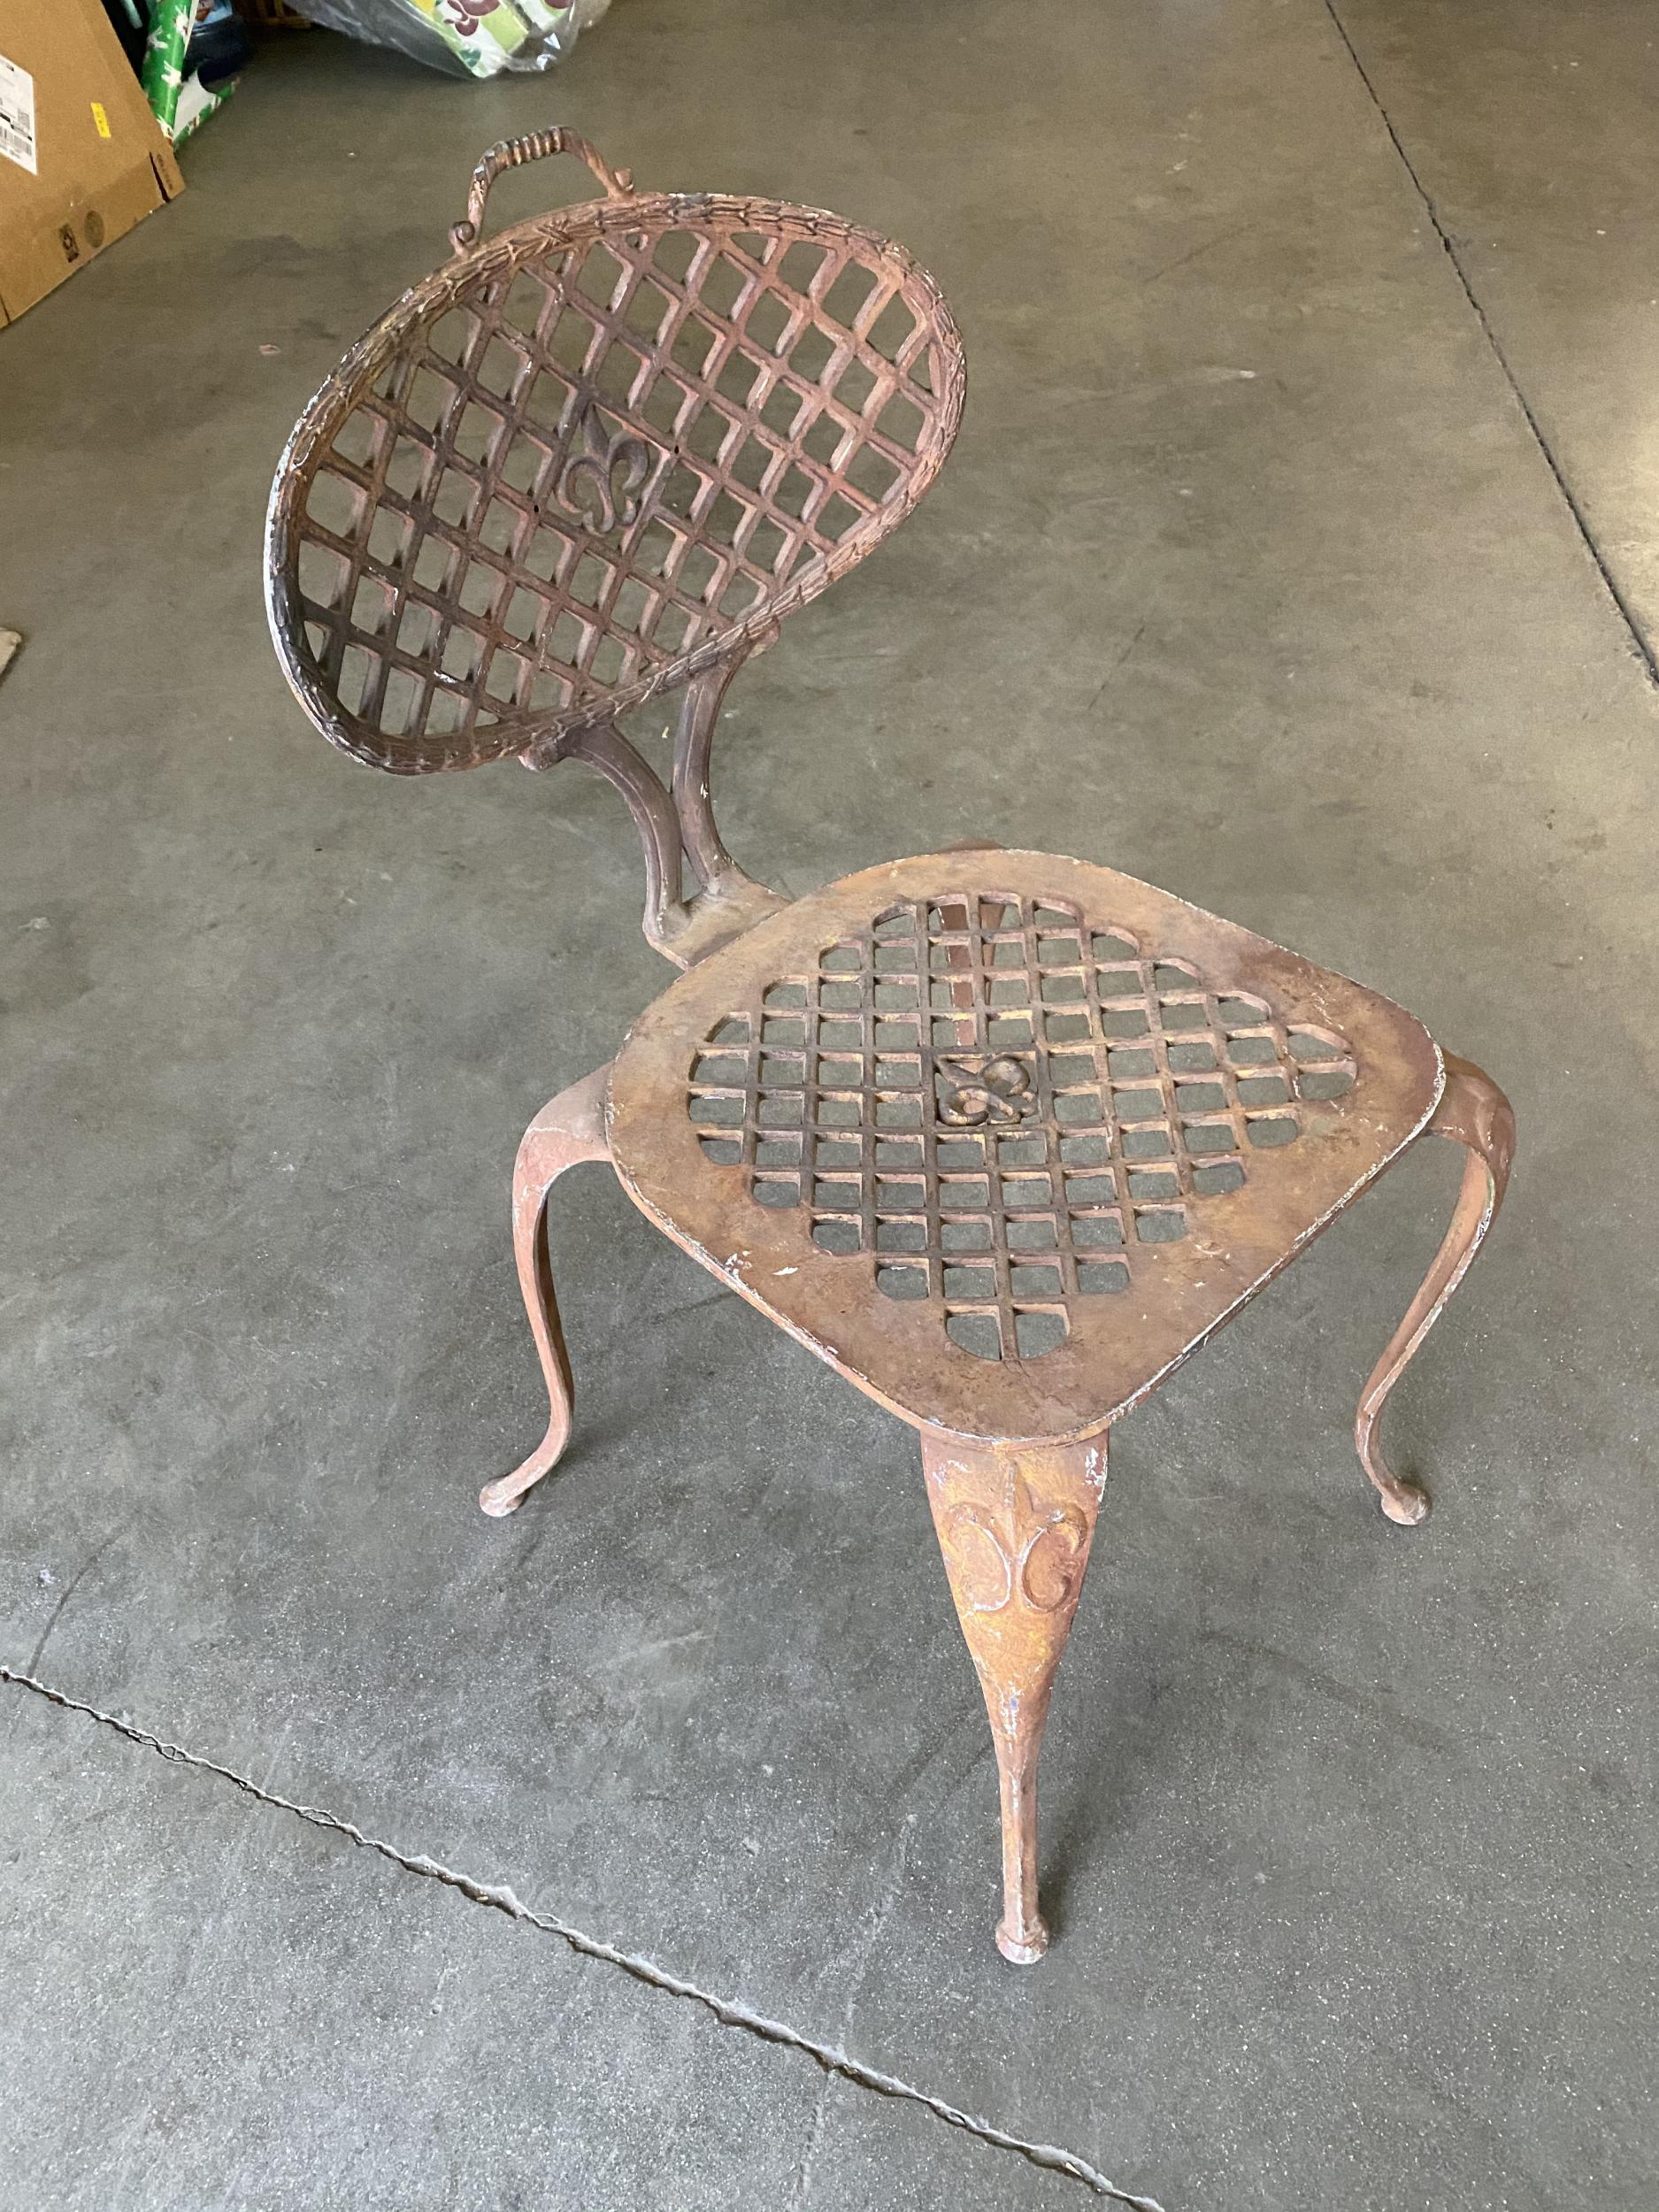 Late Victorian style iron patio garden chair with a mesh seat and stylist arched legs, made in the 1940s.

The chair has a great original patina with no rust.